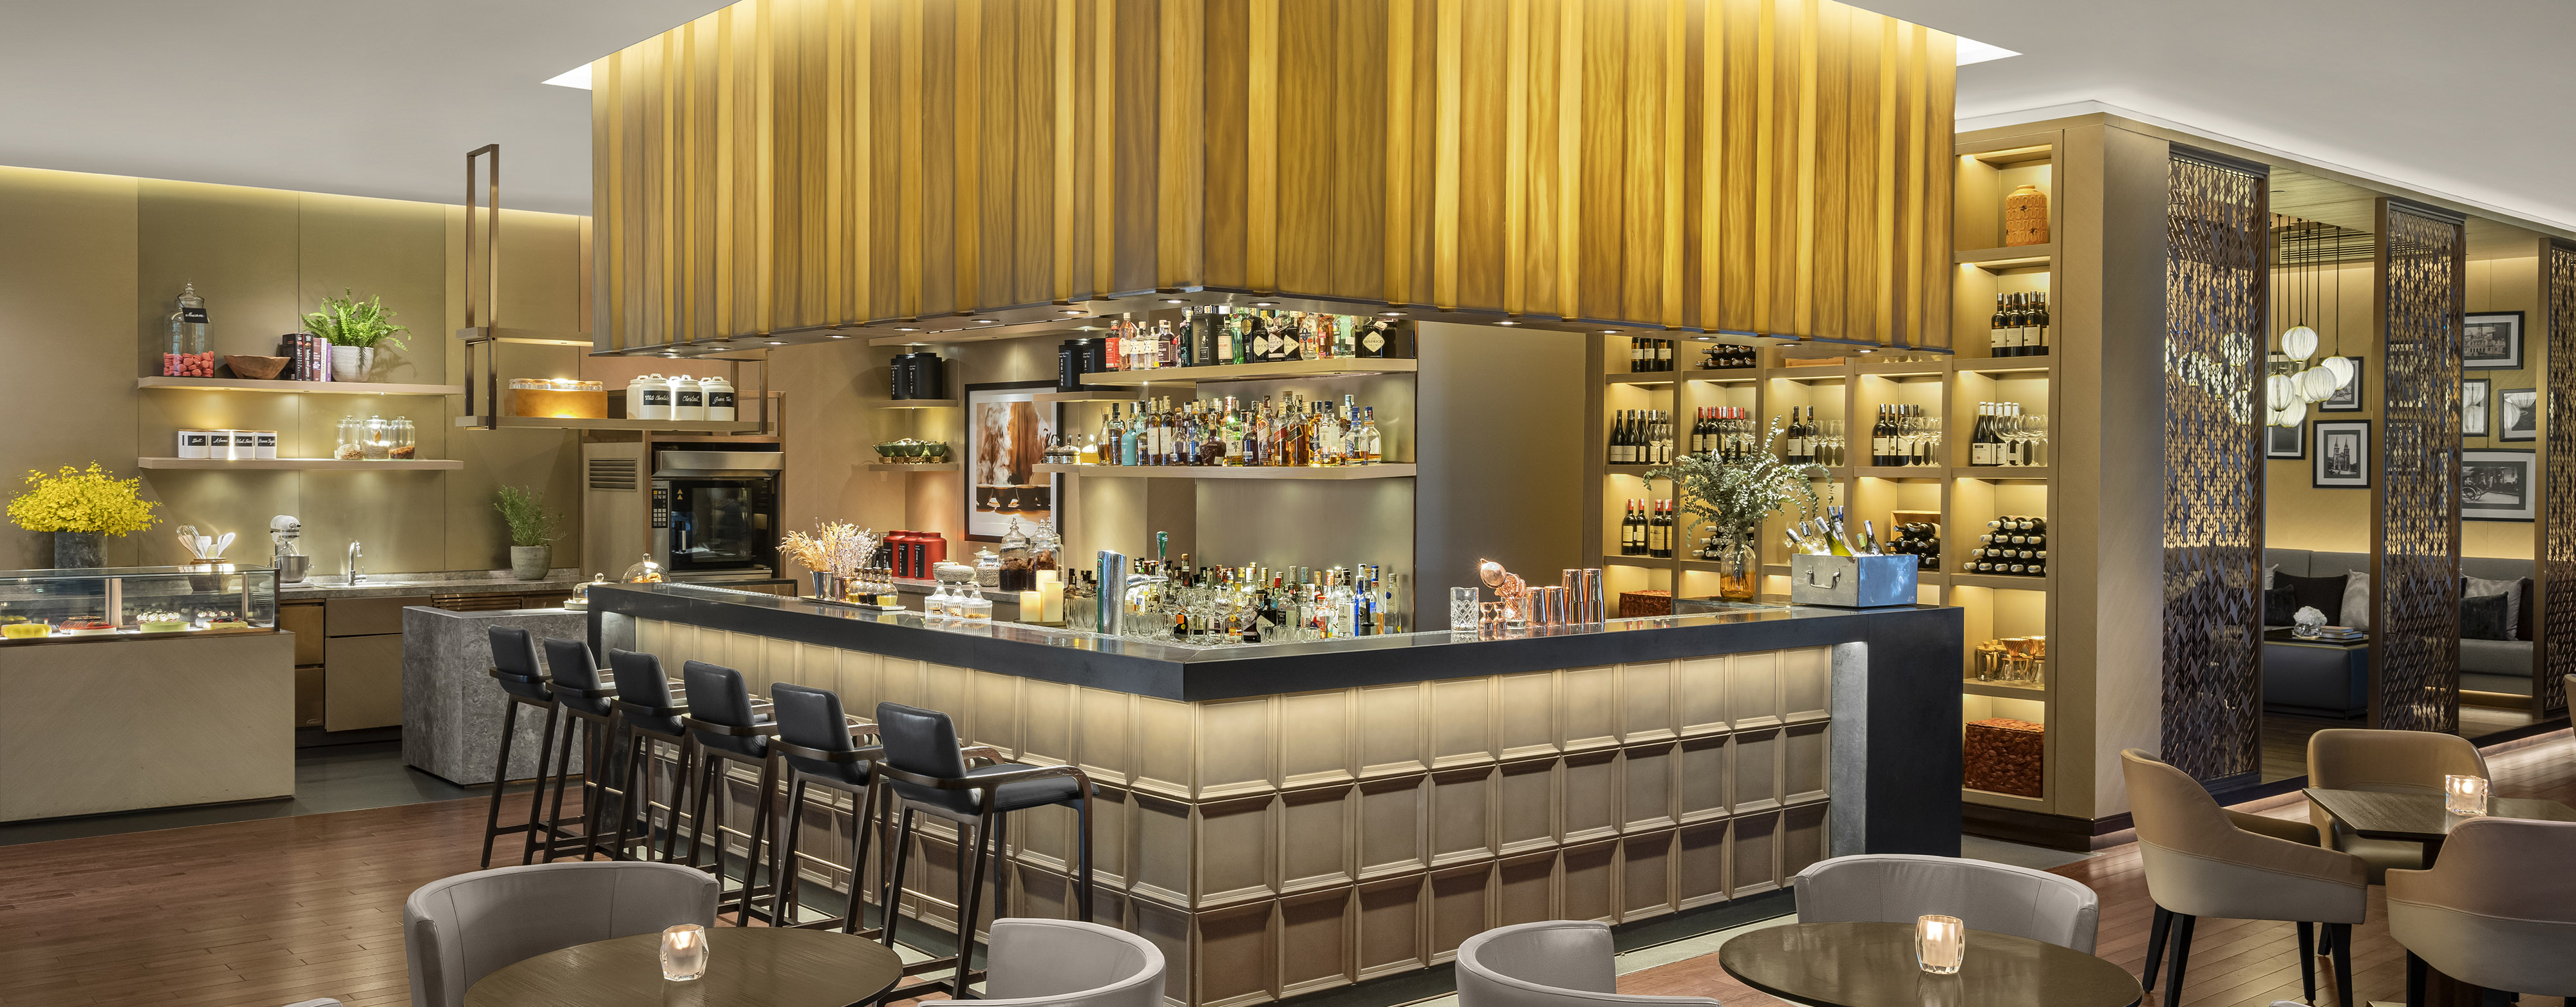 Interior of a restaurant bar and lounge in Ho Chi Minh City showing a bar area with stools and three shelves filled with various types of alcohol and liquor at New World Saigon hotel.